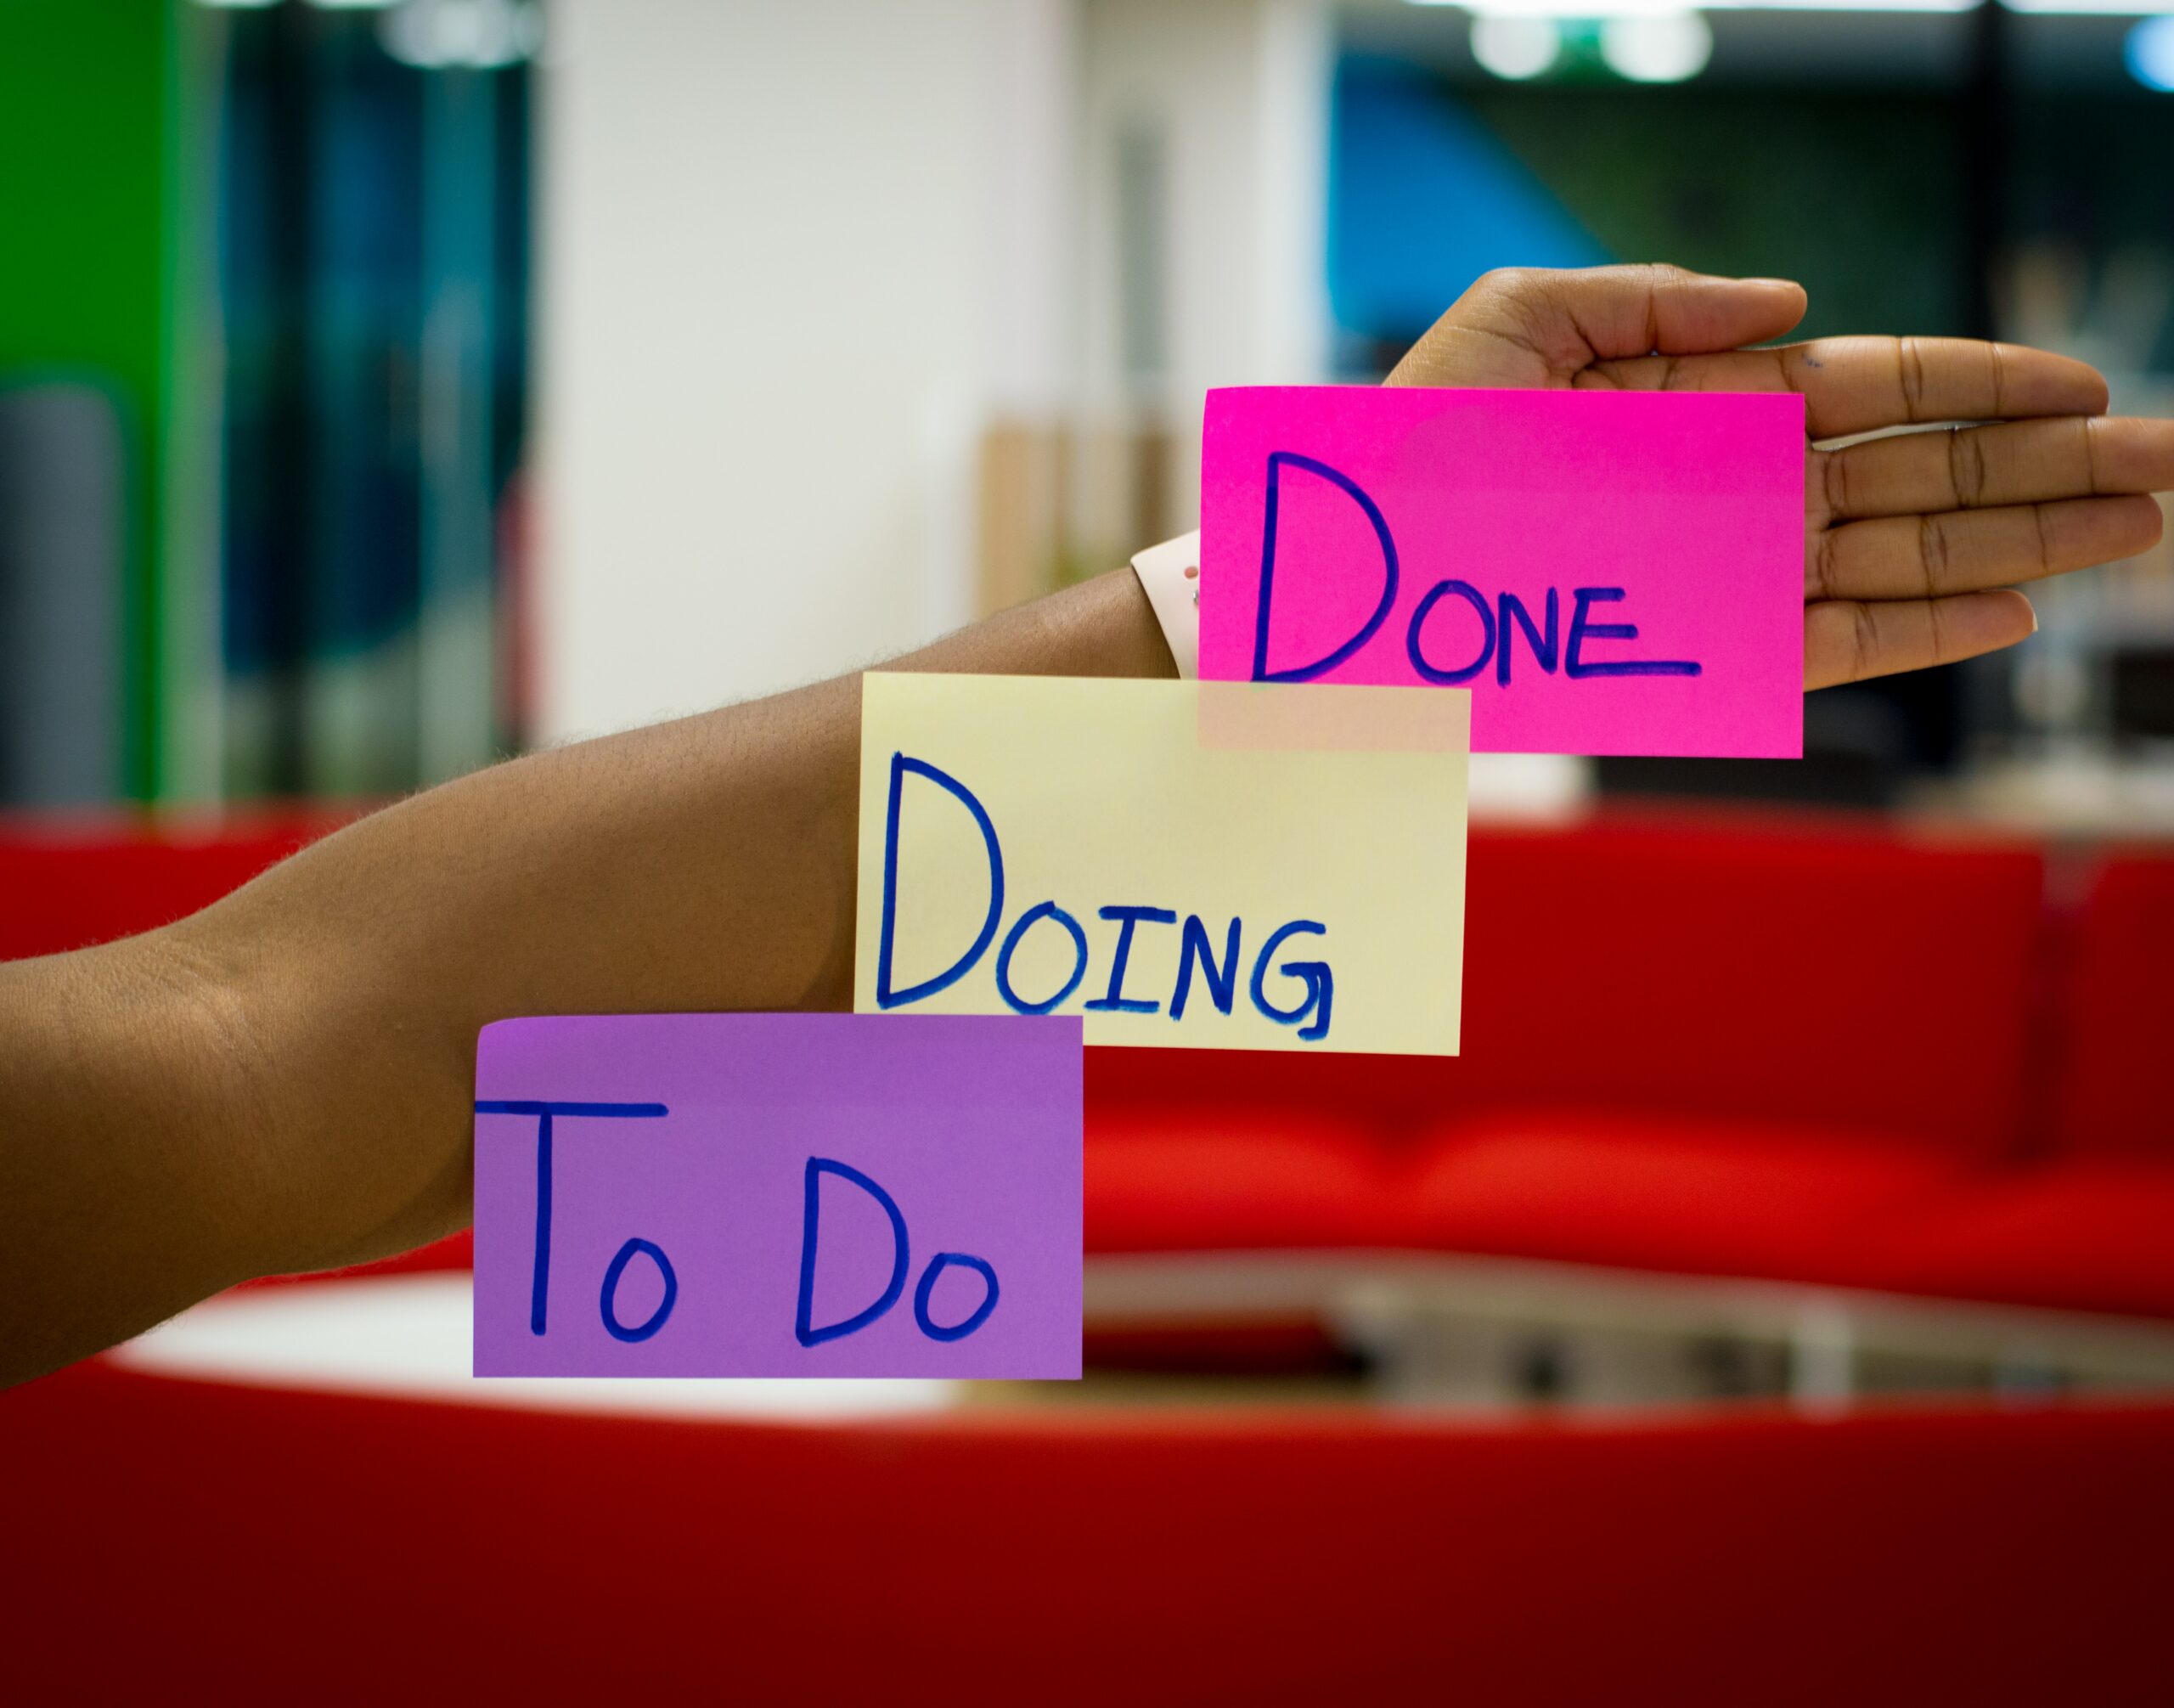 Post-it notes that say "To Do," "Doing," "Done."